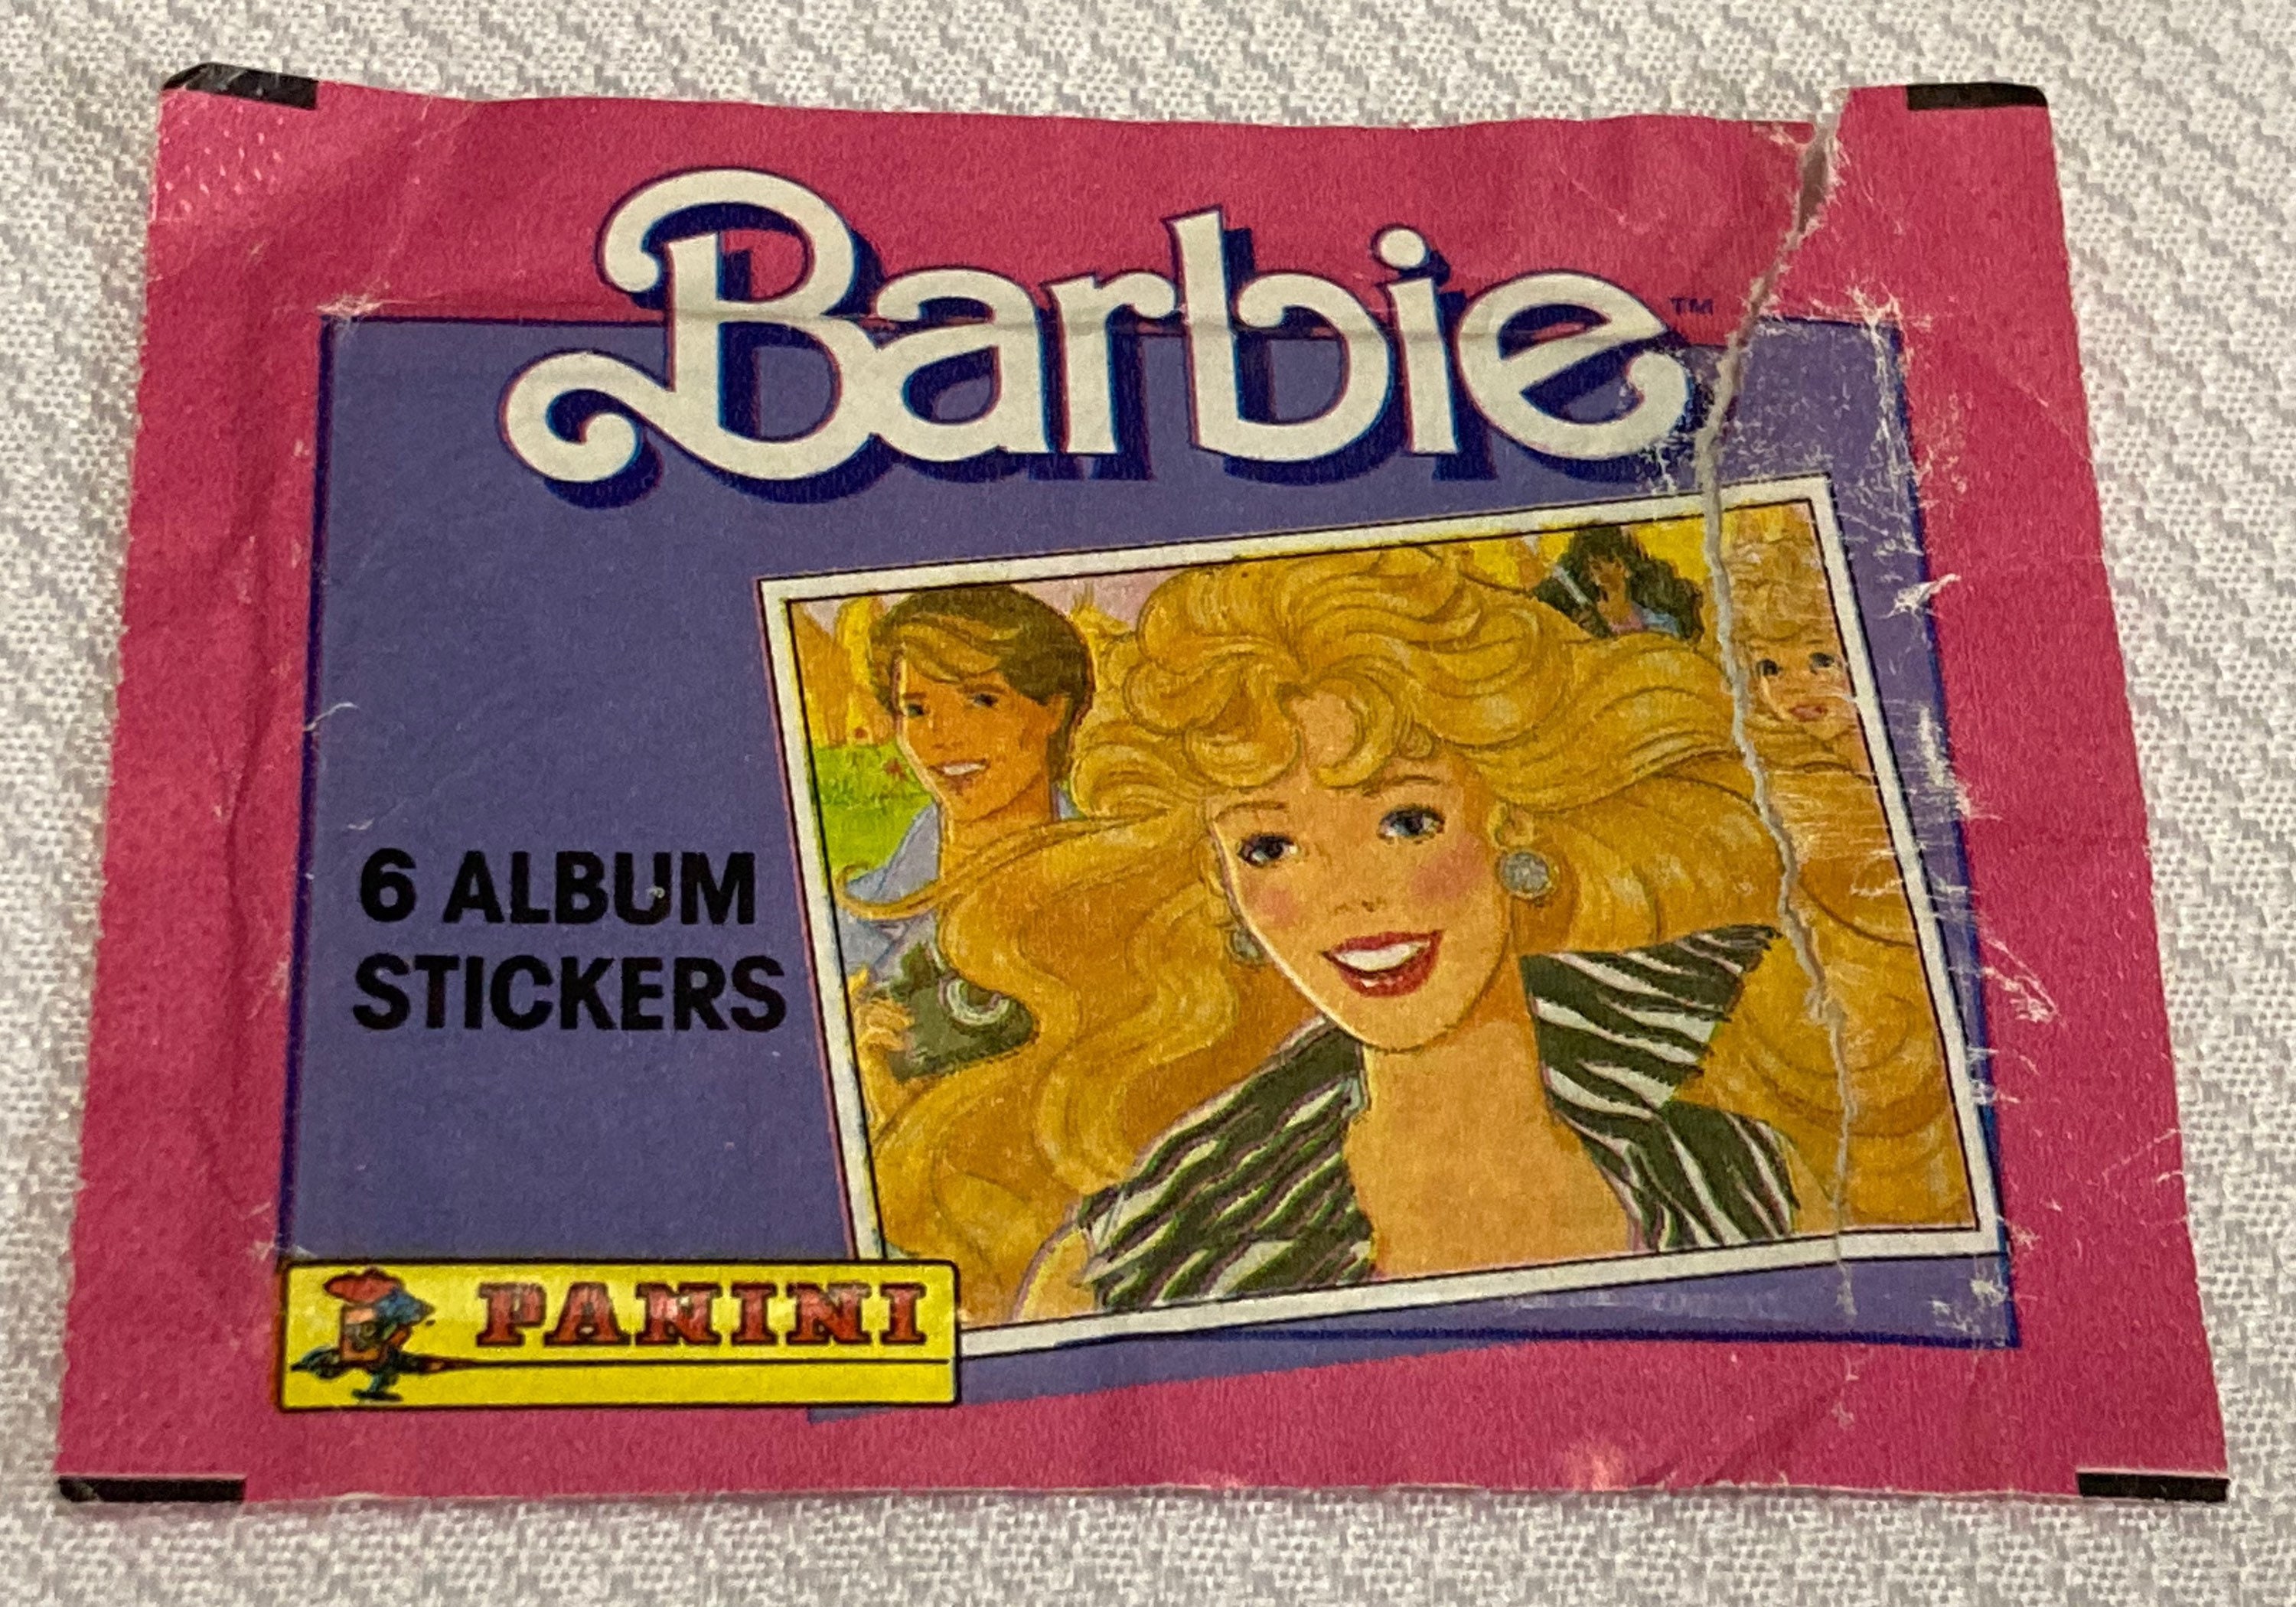 1 pack of Hobbies and Jobs vintage album stickers. 4 stickers per pack.  Released by Panini in 1975. Very rare!